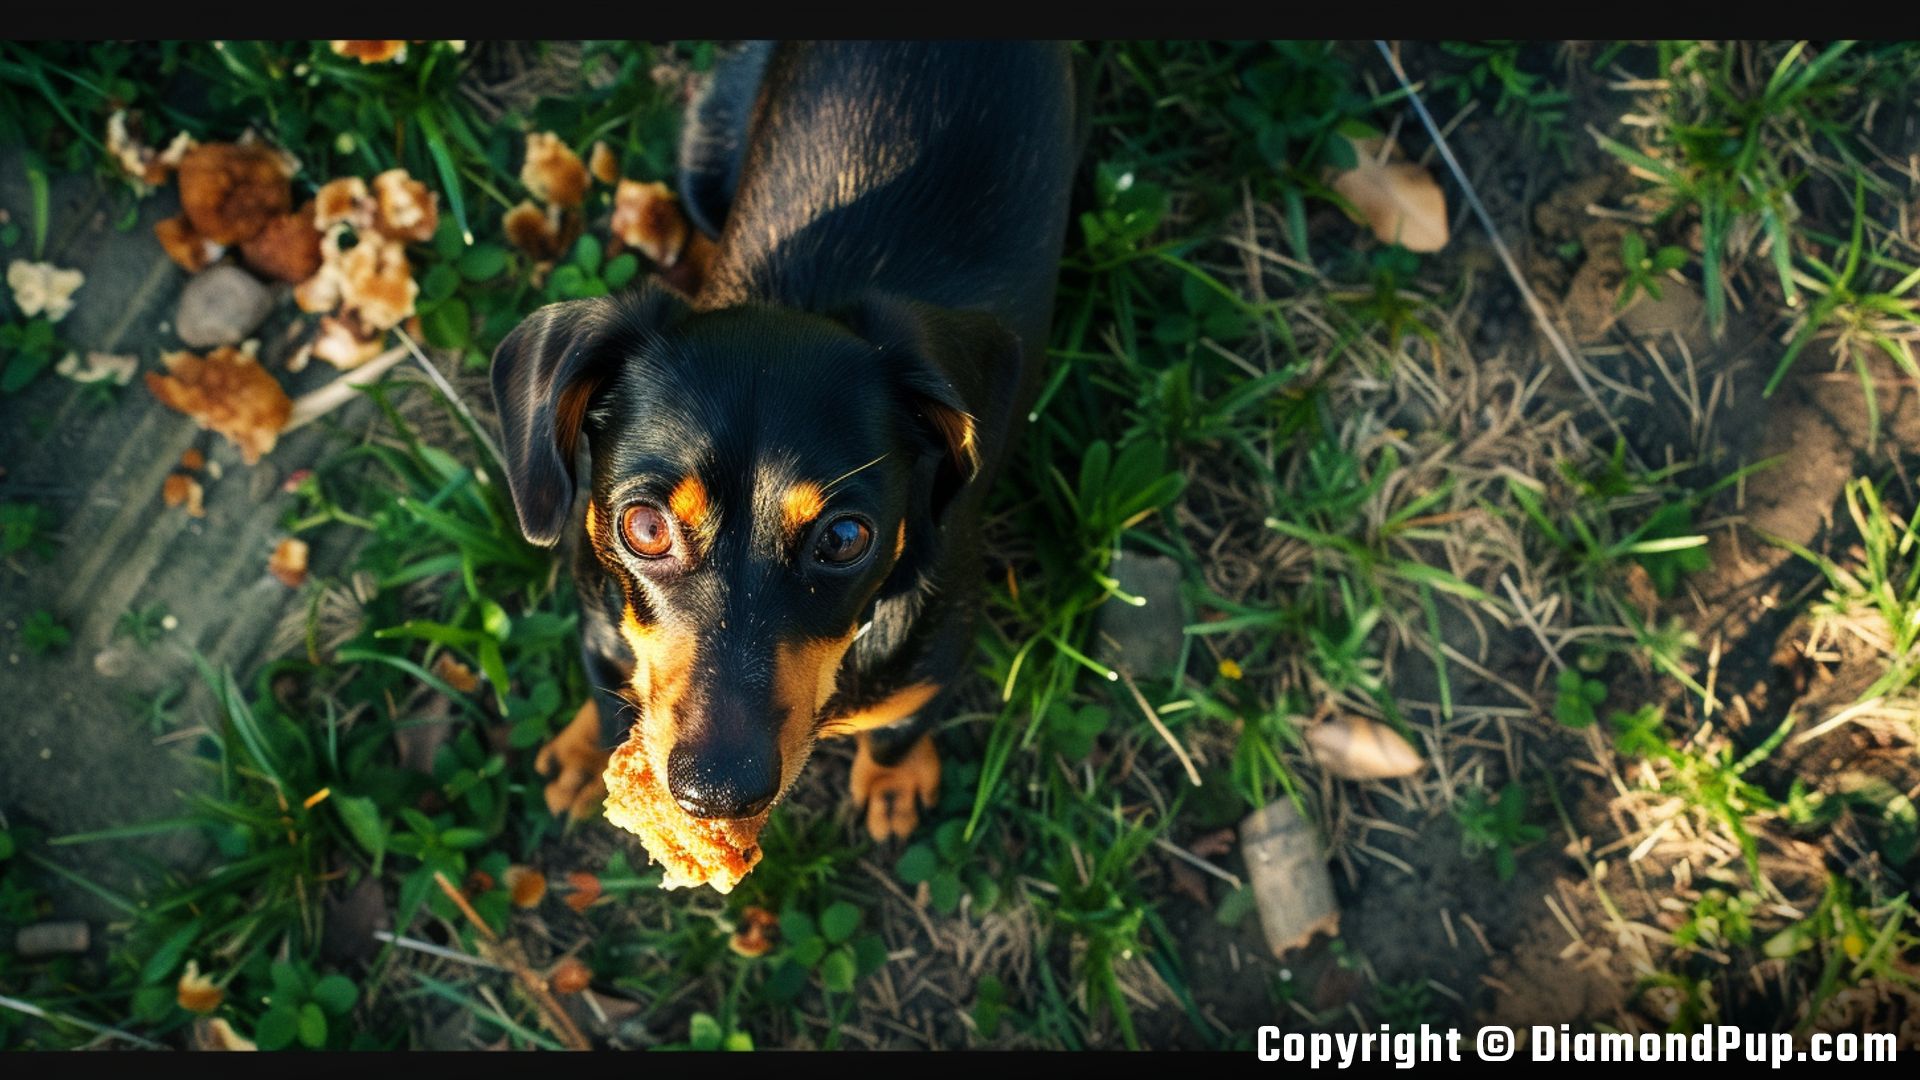 Picture of a Cute Dachshund Snacking on Chicken